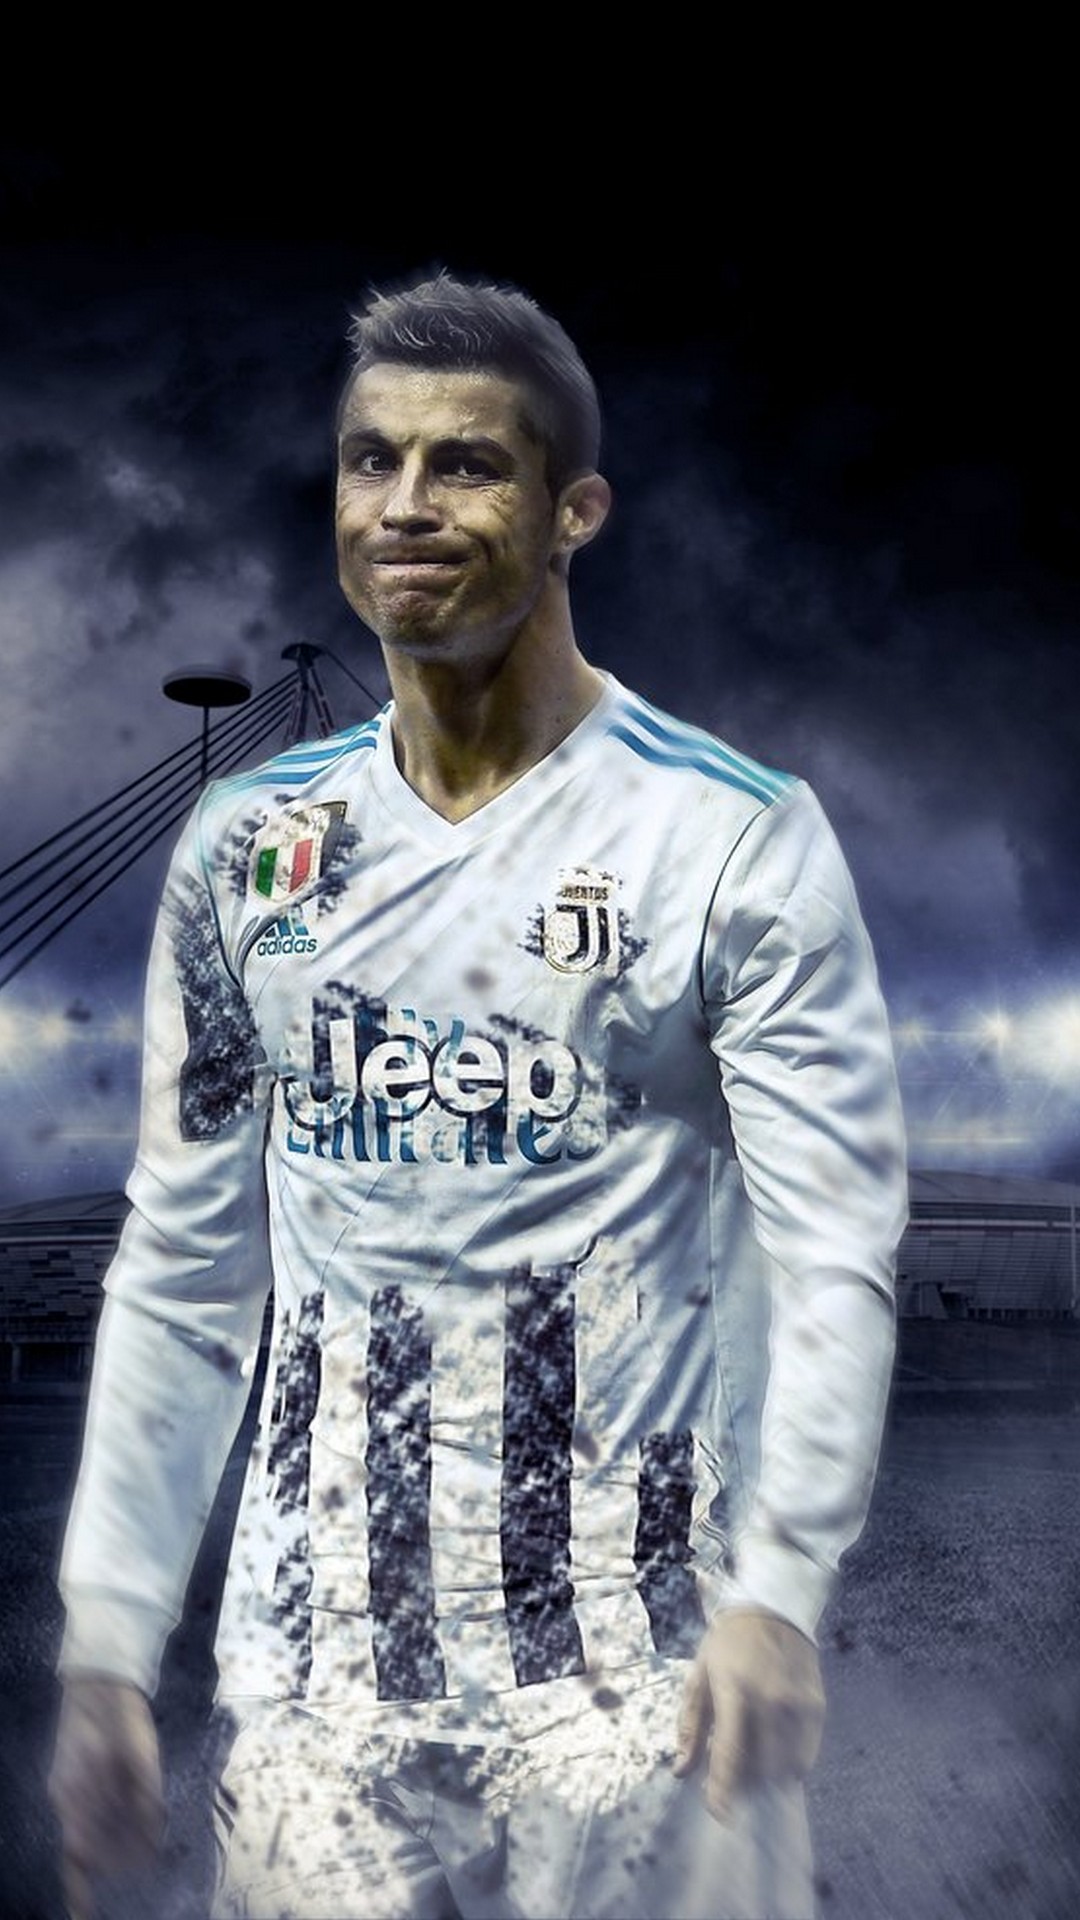 CR7 Juventus Android Wallpaper with image resolution 1080x1920 pixel. You can make this wallpaper for your Android backgrounds, Tablet, Smartphones Screensavers and Mobile Phone Lock Screen